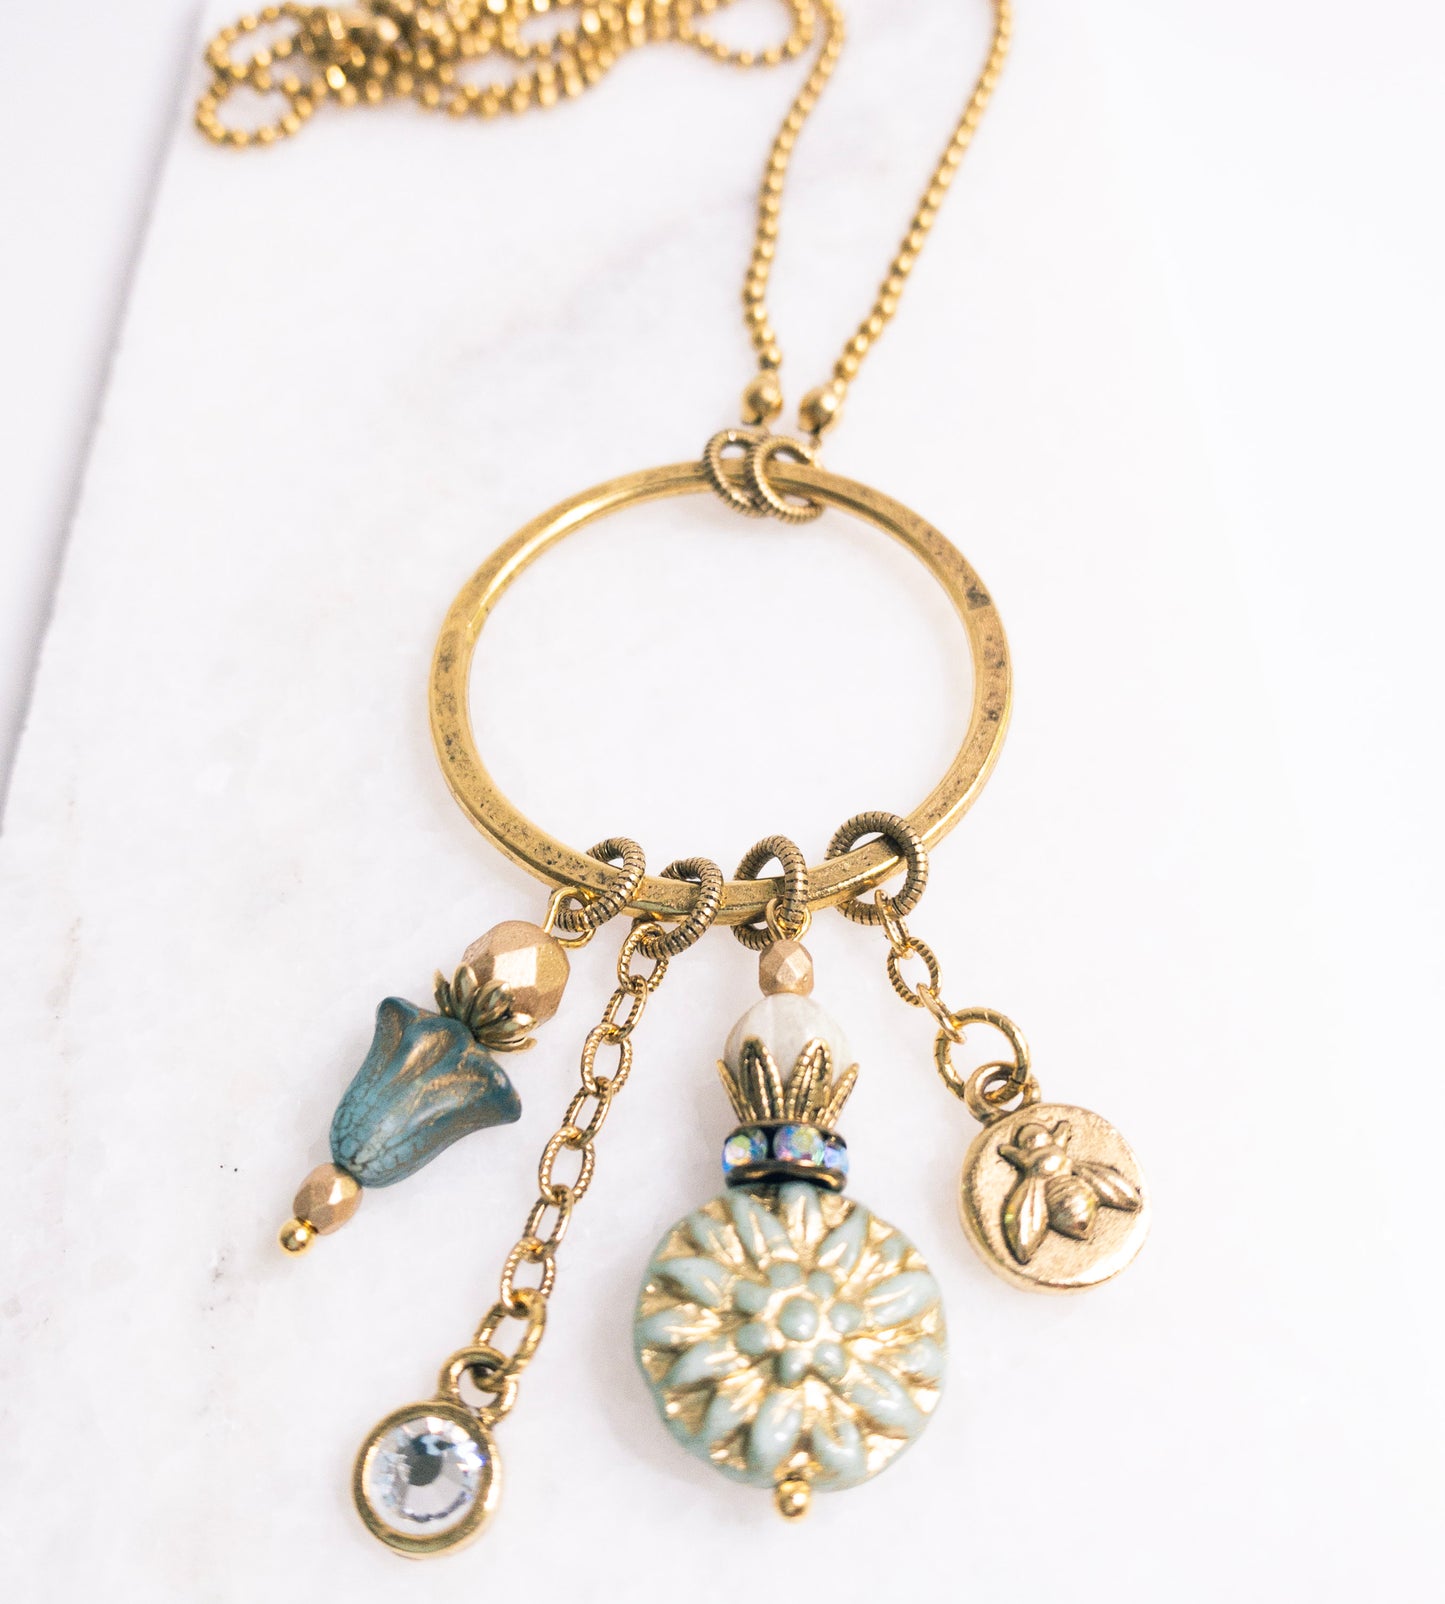 Gold Charm Necklace with Czech Glass